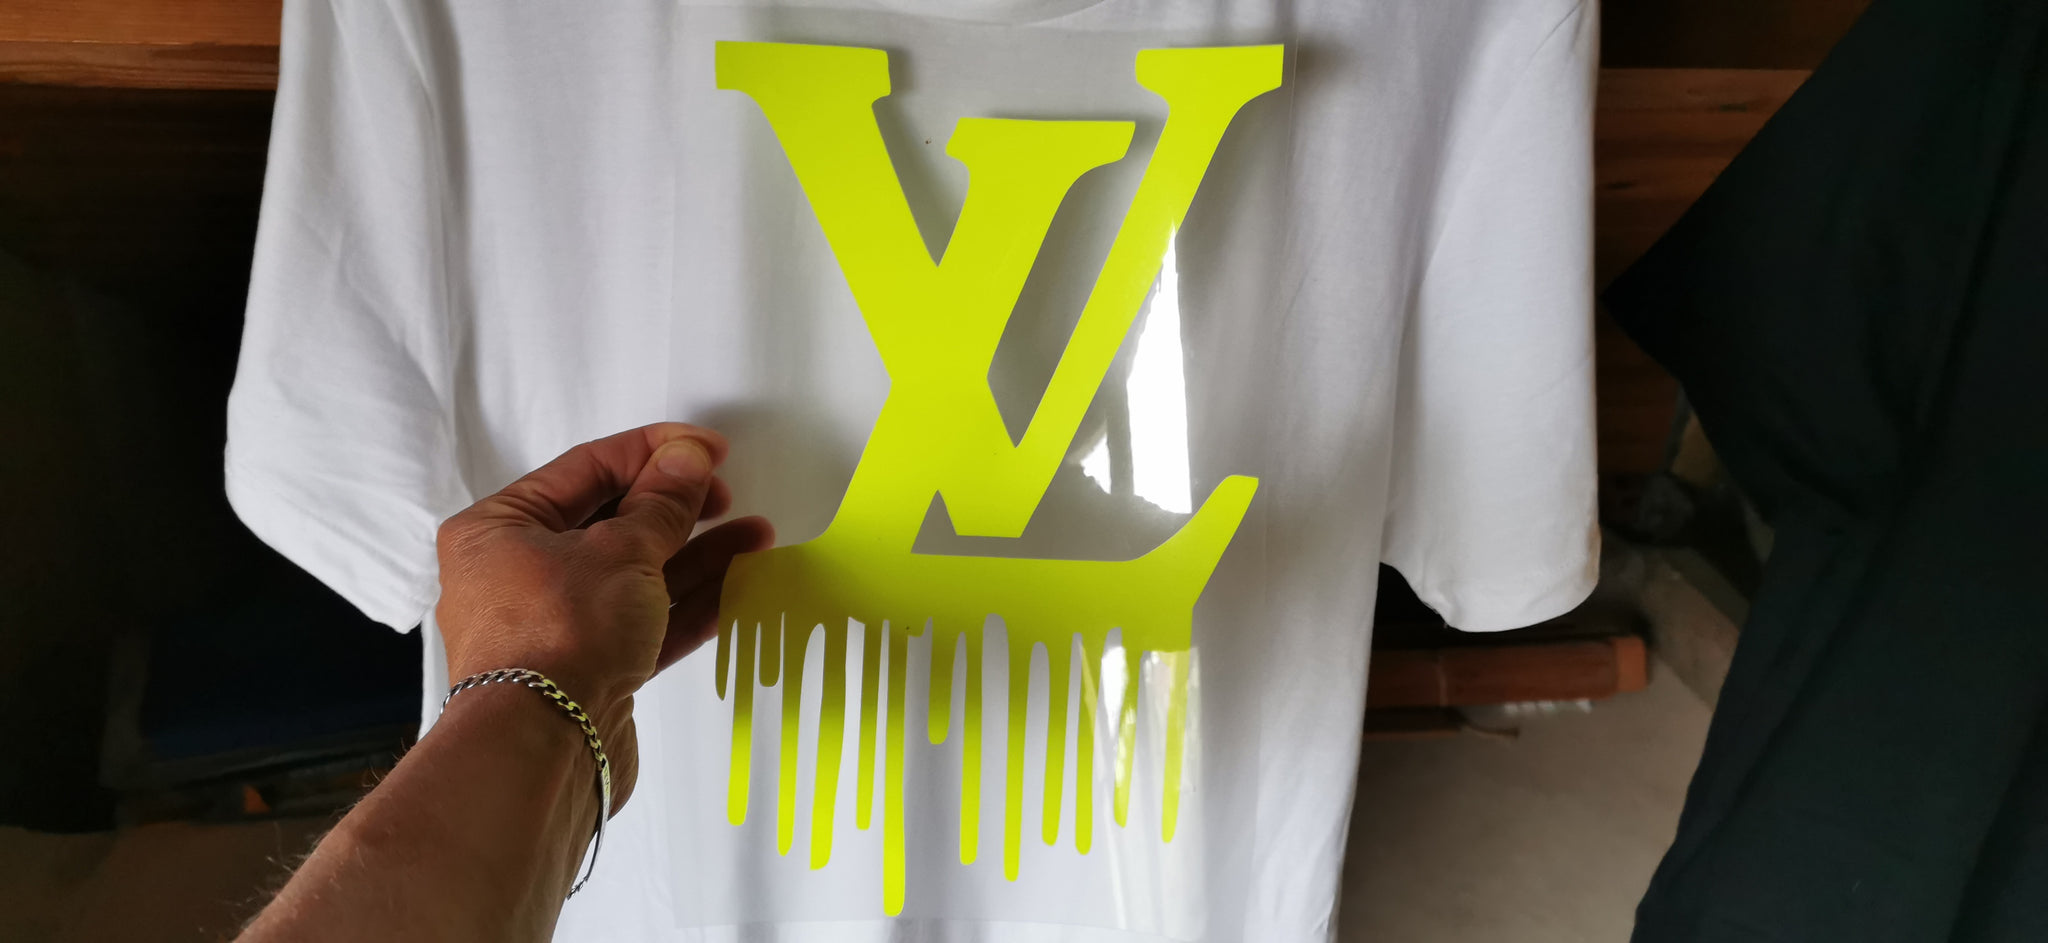 Louis Vuitton Dripping Embroidery, LV Logo Embroidery, Louis